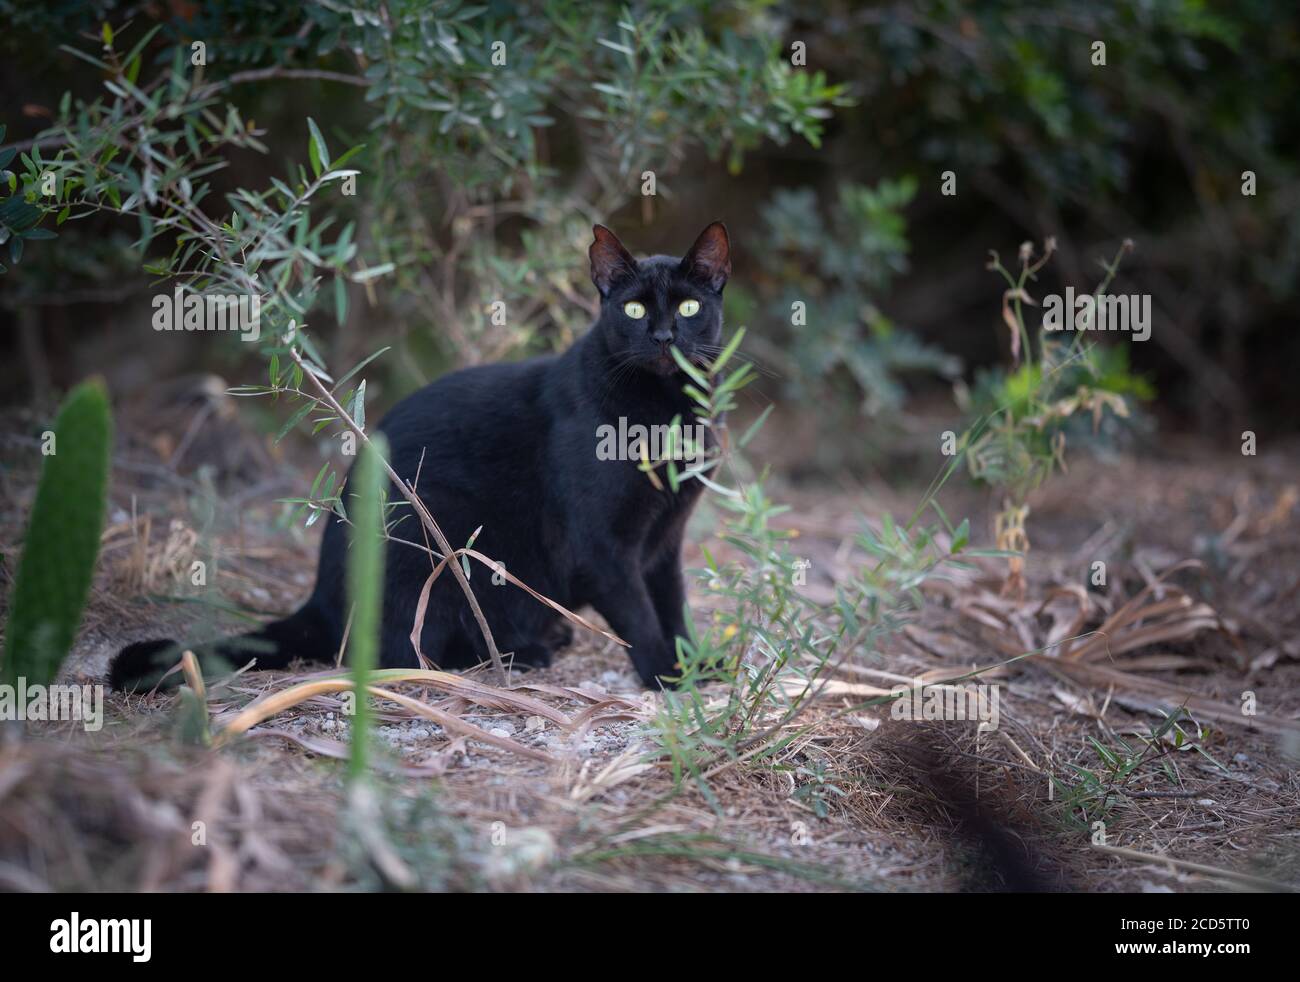 31 HQ Images Stray Cat Ear Notch : Mallorca 2019 Side View Of A Black Stray Cat With Ear Notch Walking Crossing The Street Looking At Camera On Majorca Buy This Stock Photo And Explore Similar Images At Adobe